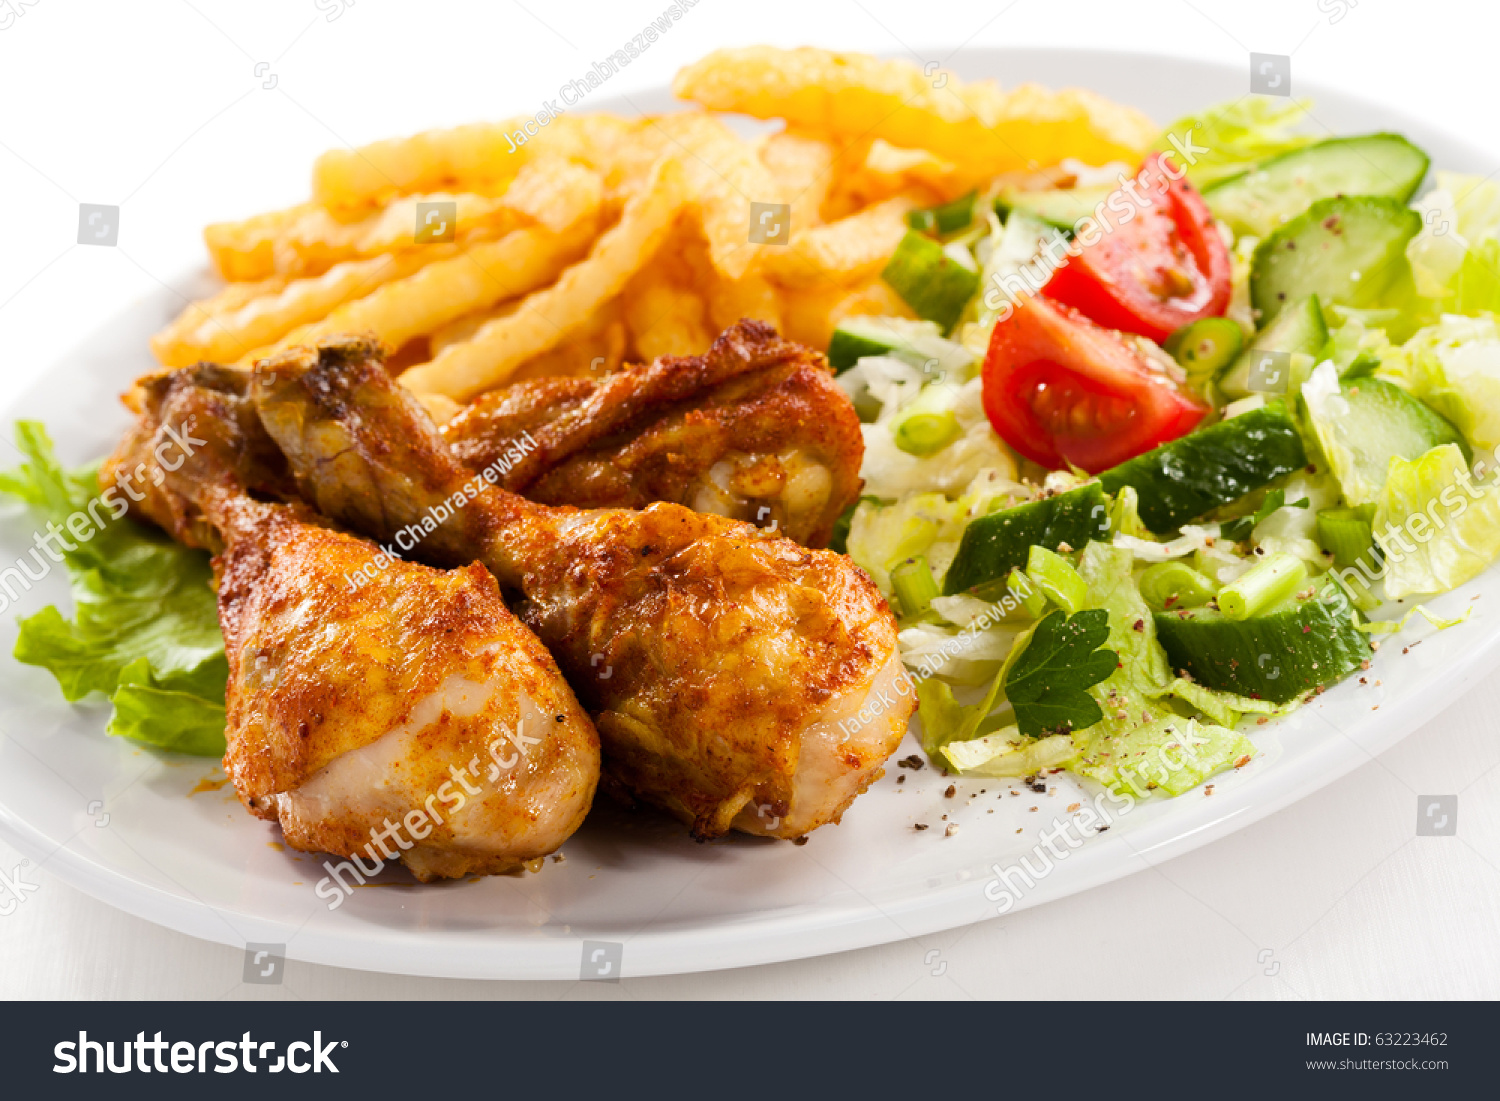 Grilled Chicken Drumstick, French Fries And Vegetables Stock Photo ...